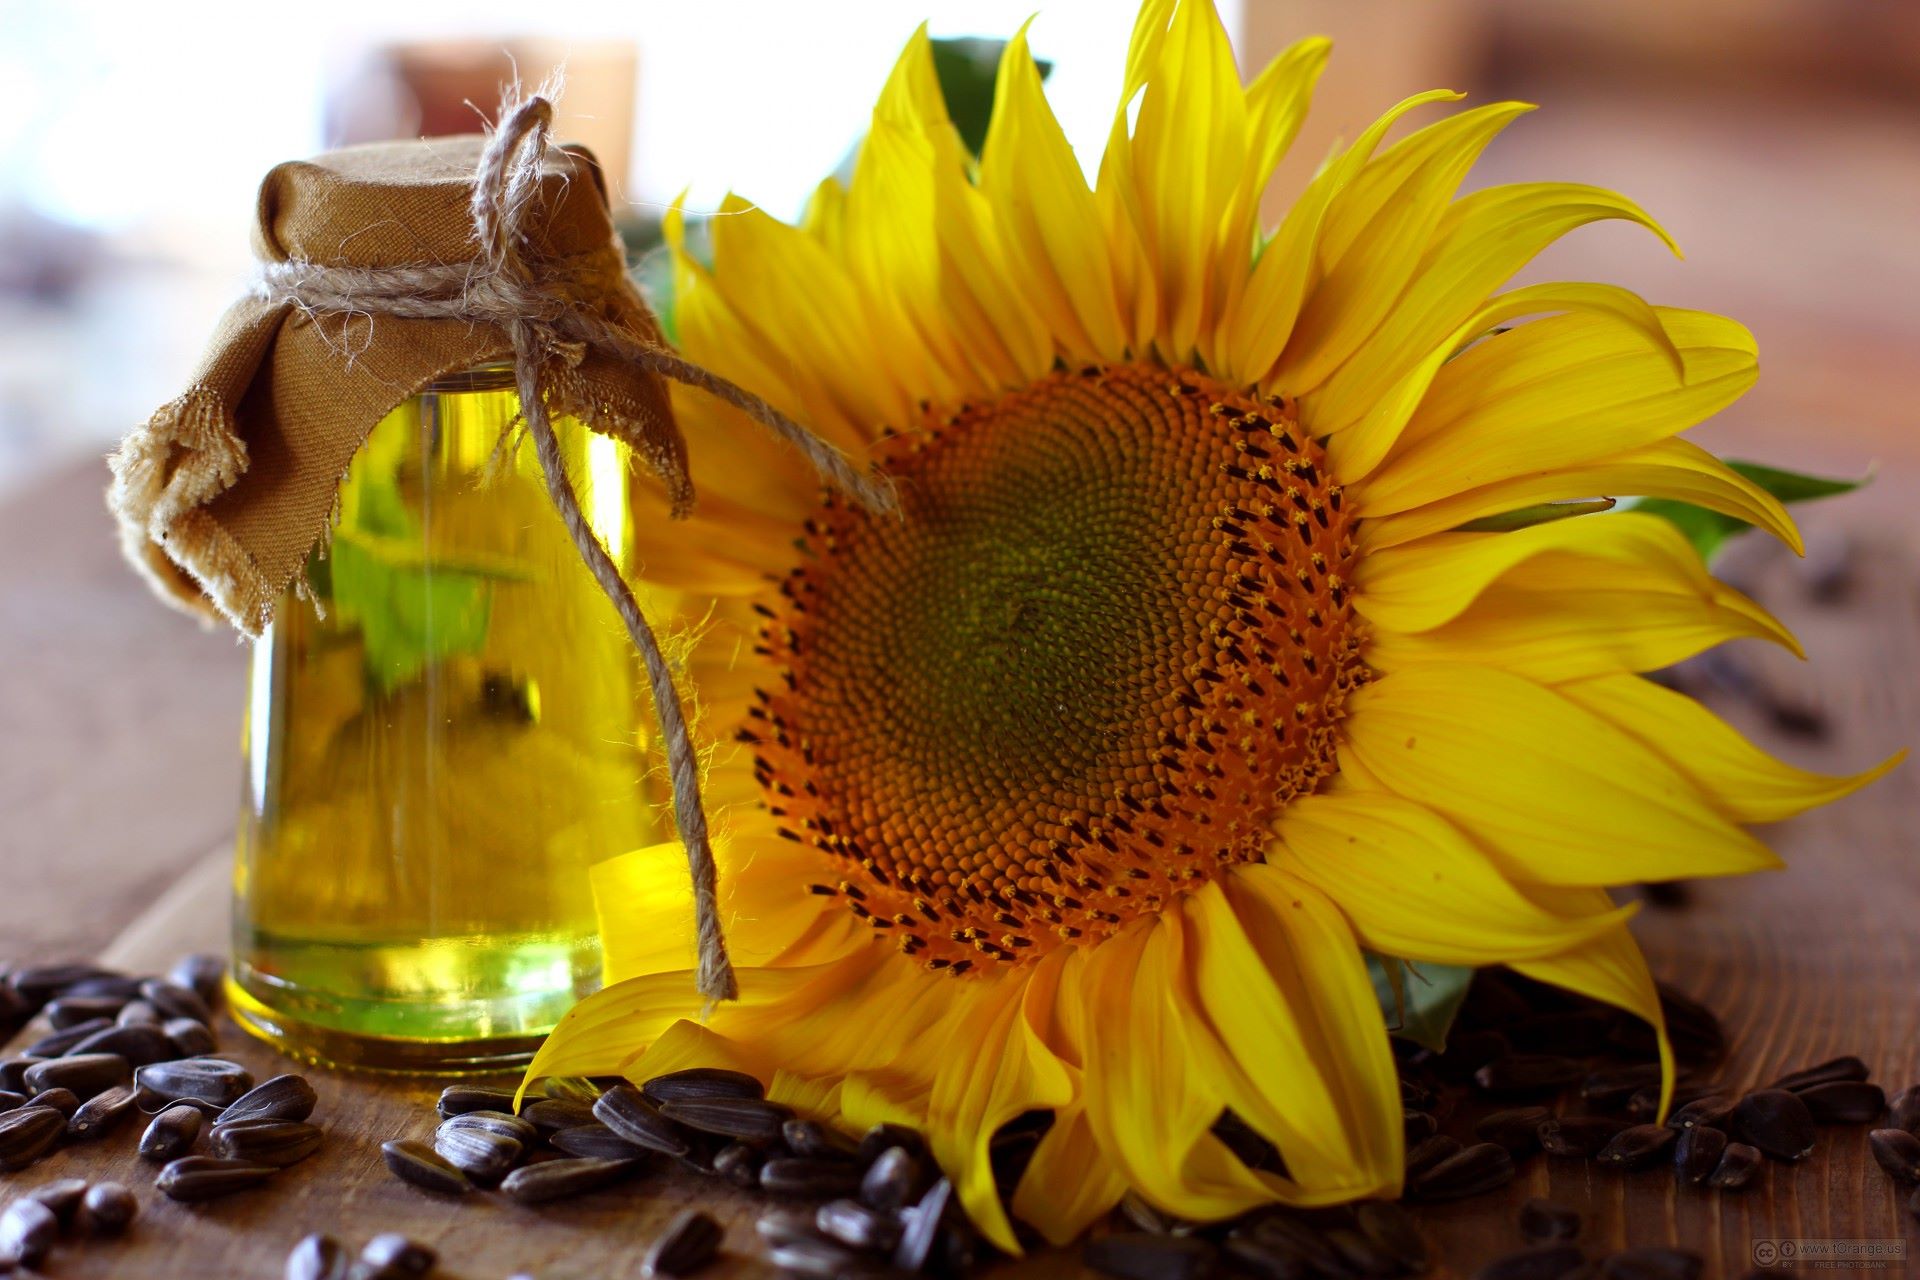 What To Make With Sunflower Seeds